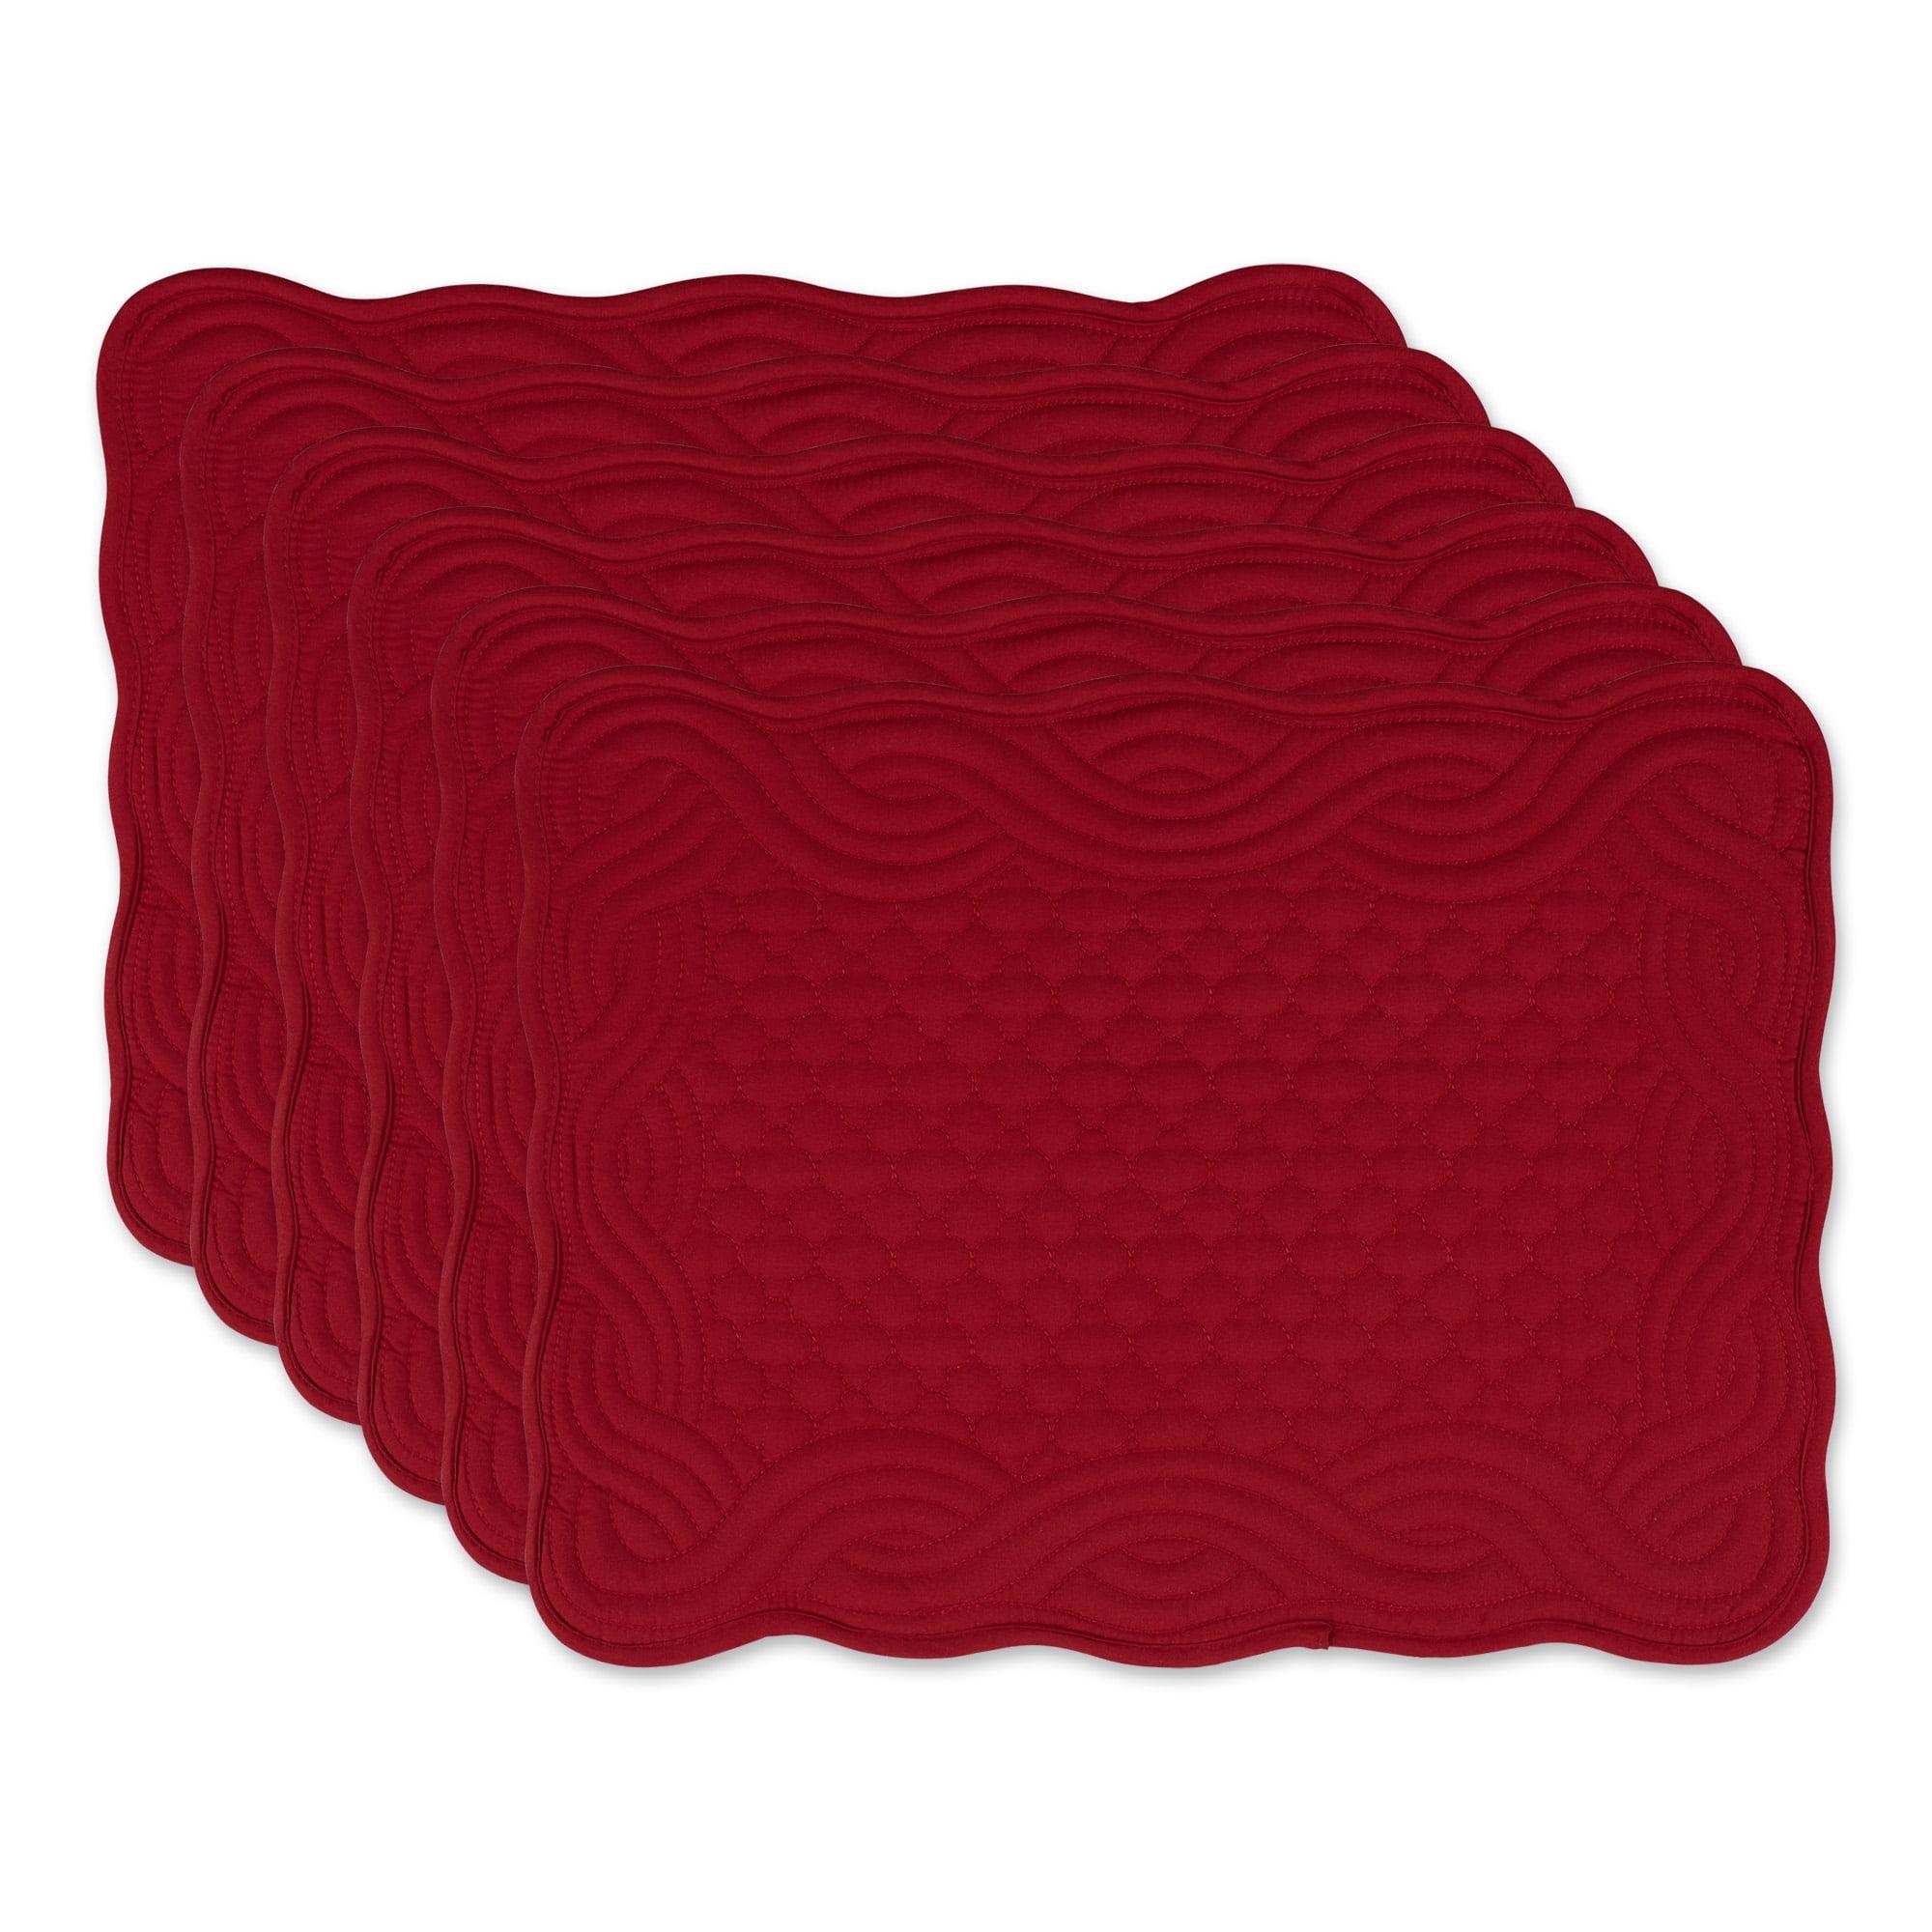 Cranberry Quilted Polyester Farmhouse 13x18" Placemat Set